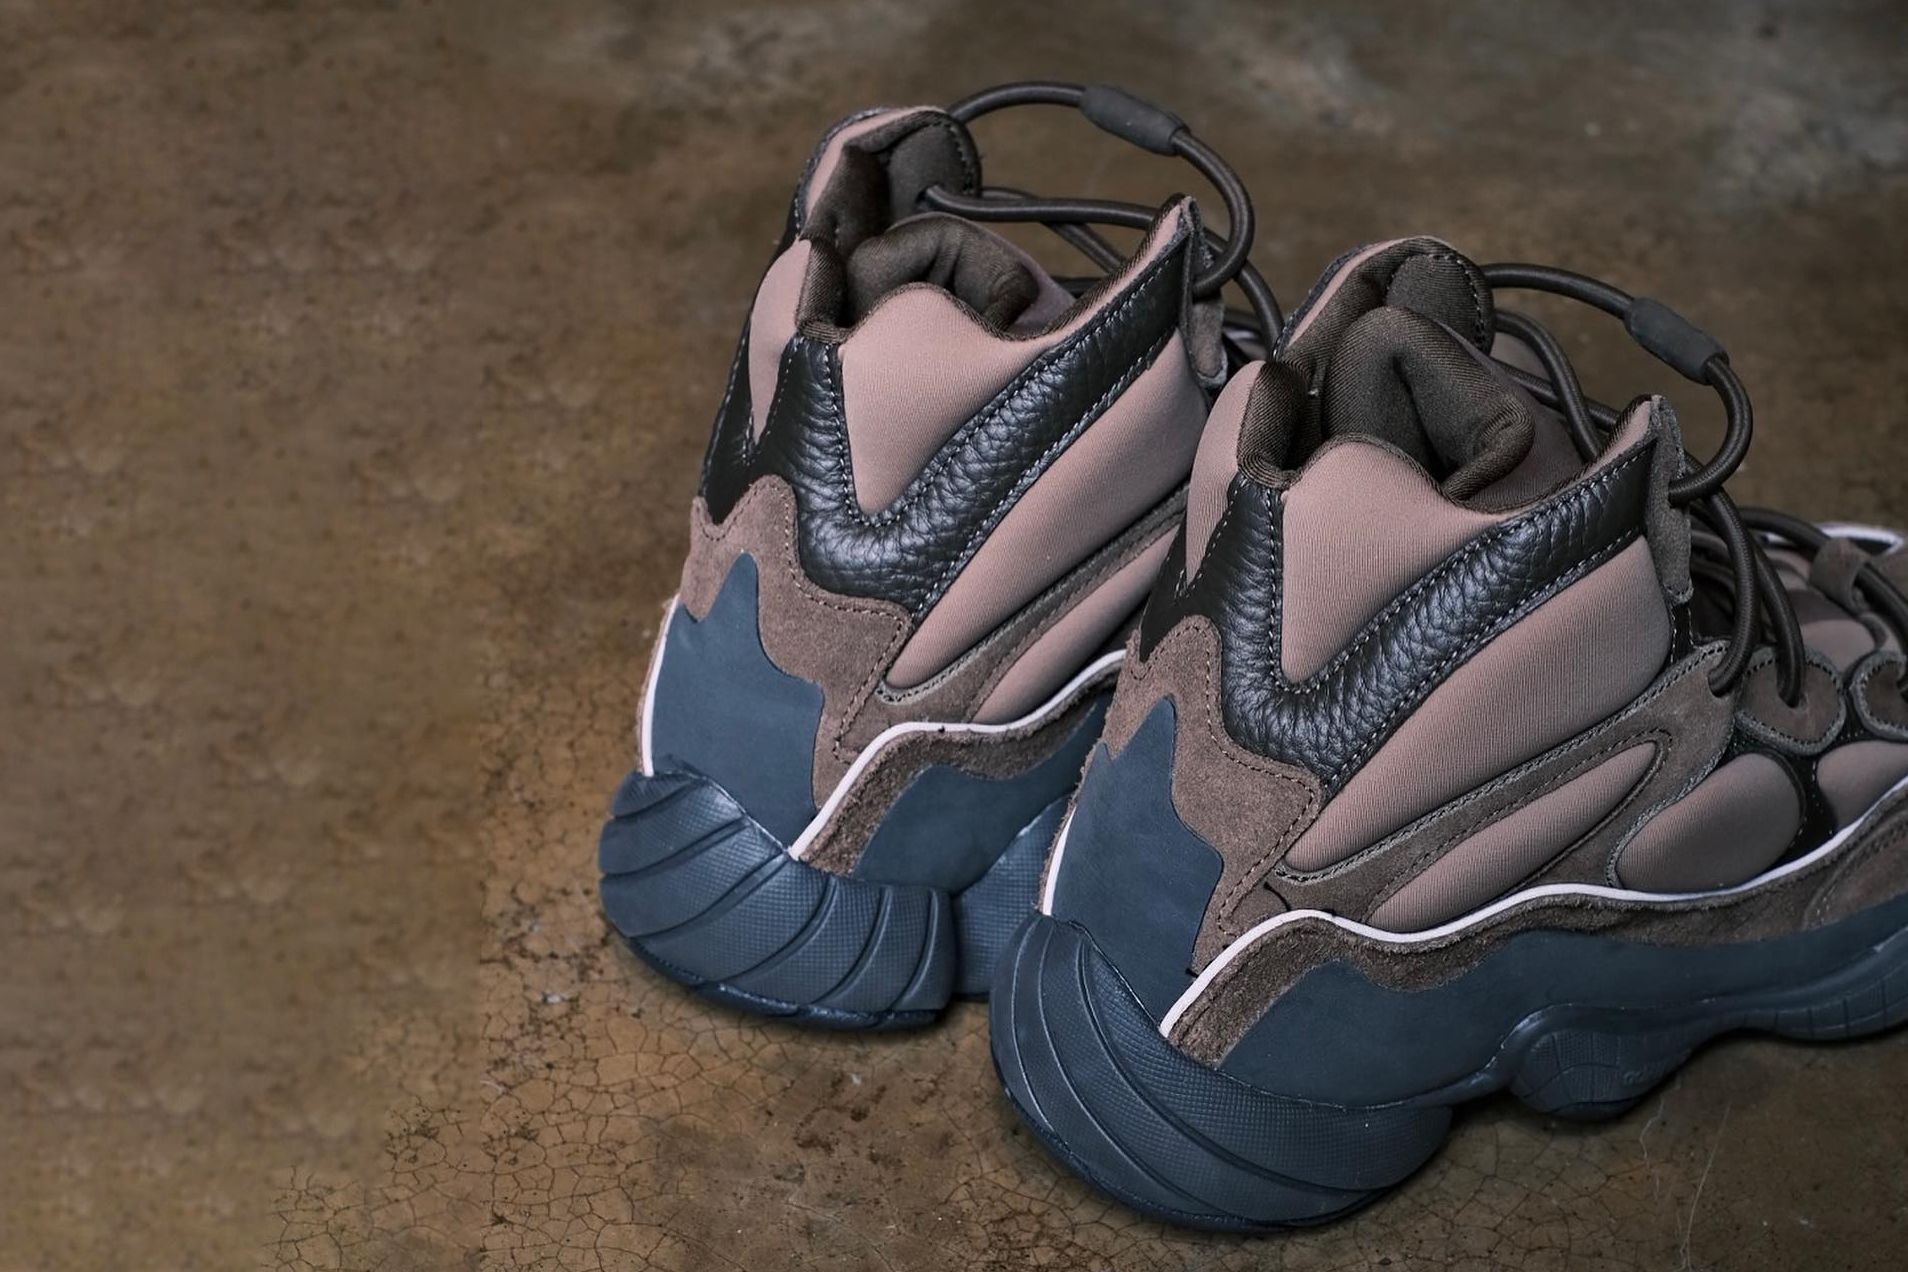 The adidas Yeezy 500 High Appears in Brown and Black - Sneaker Freaker